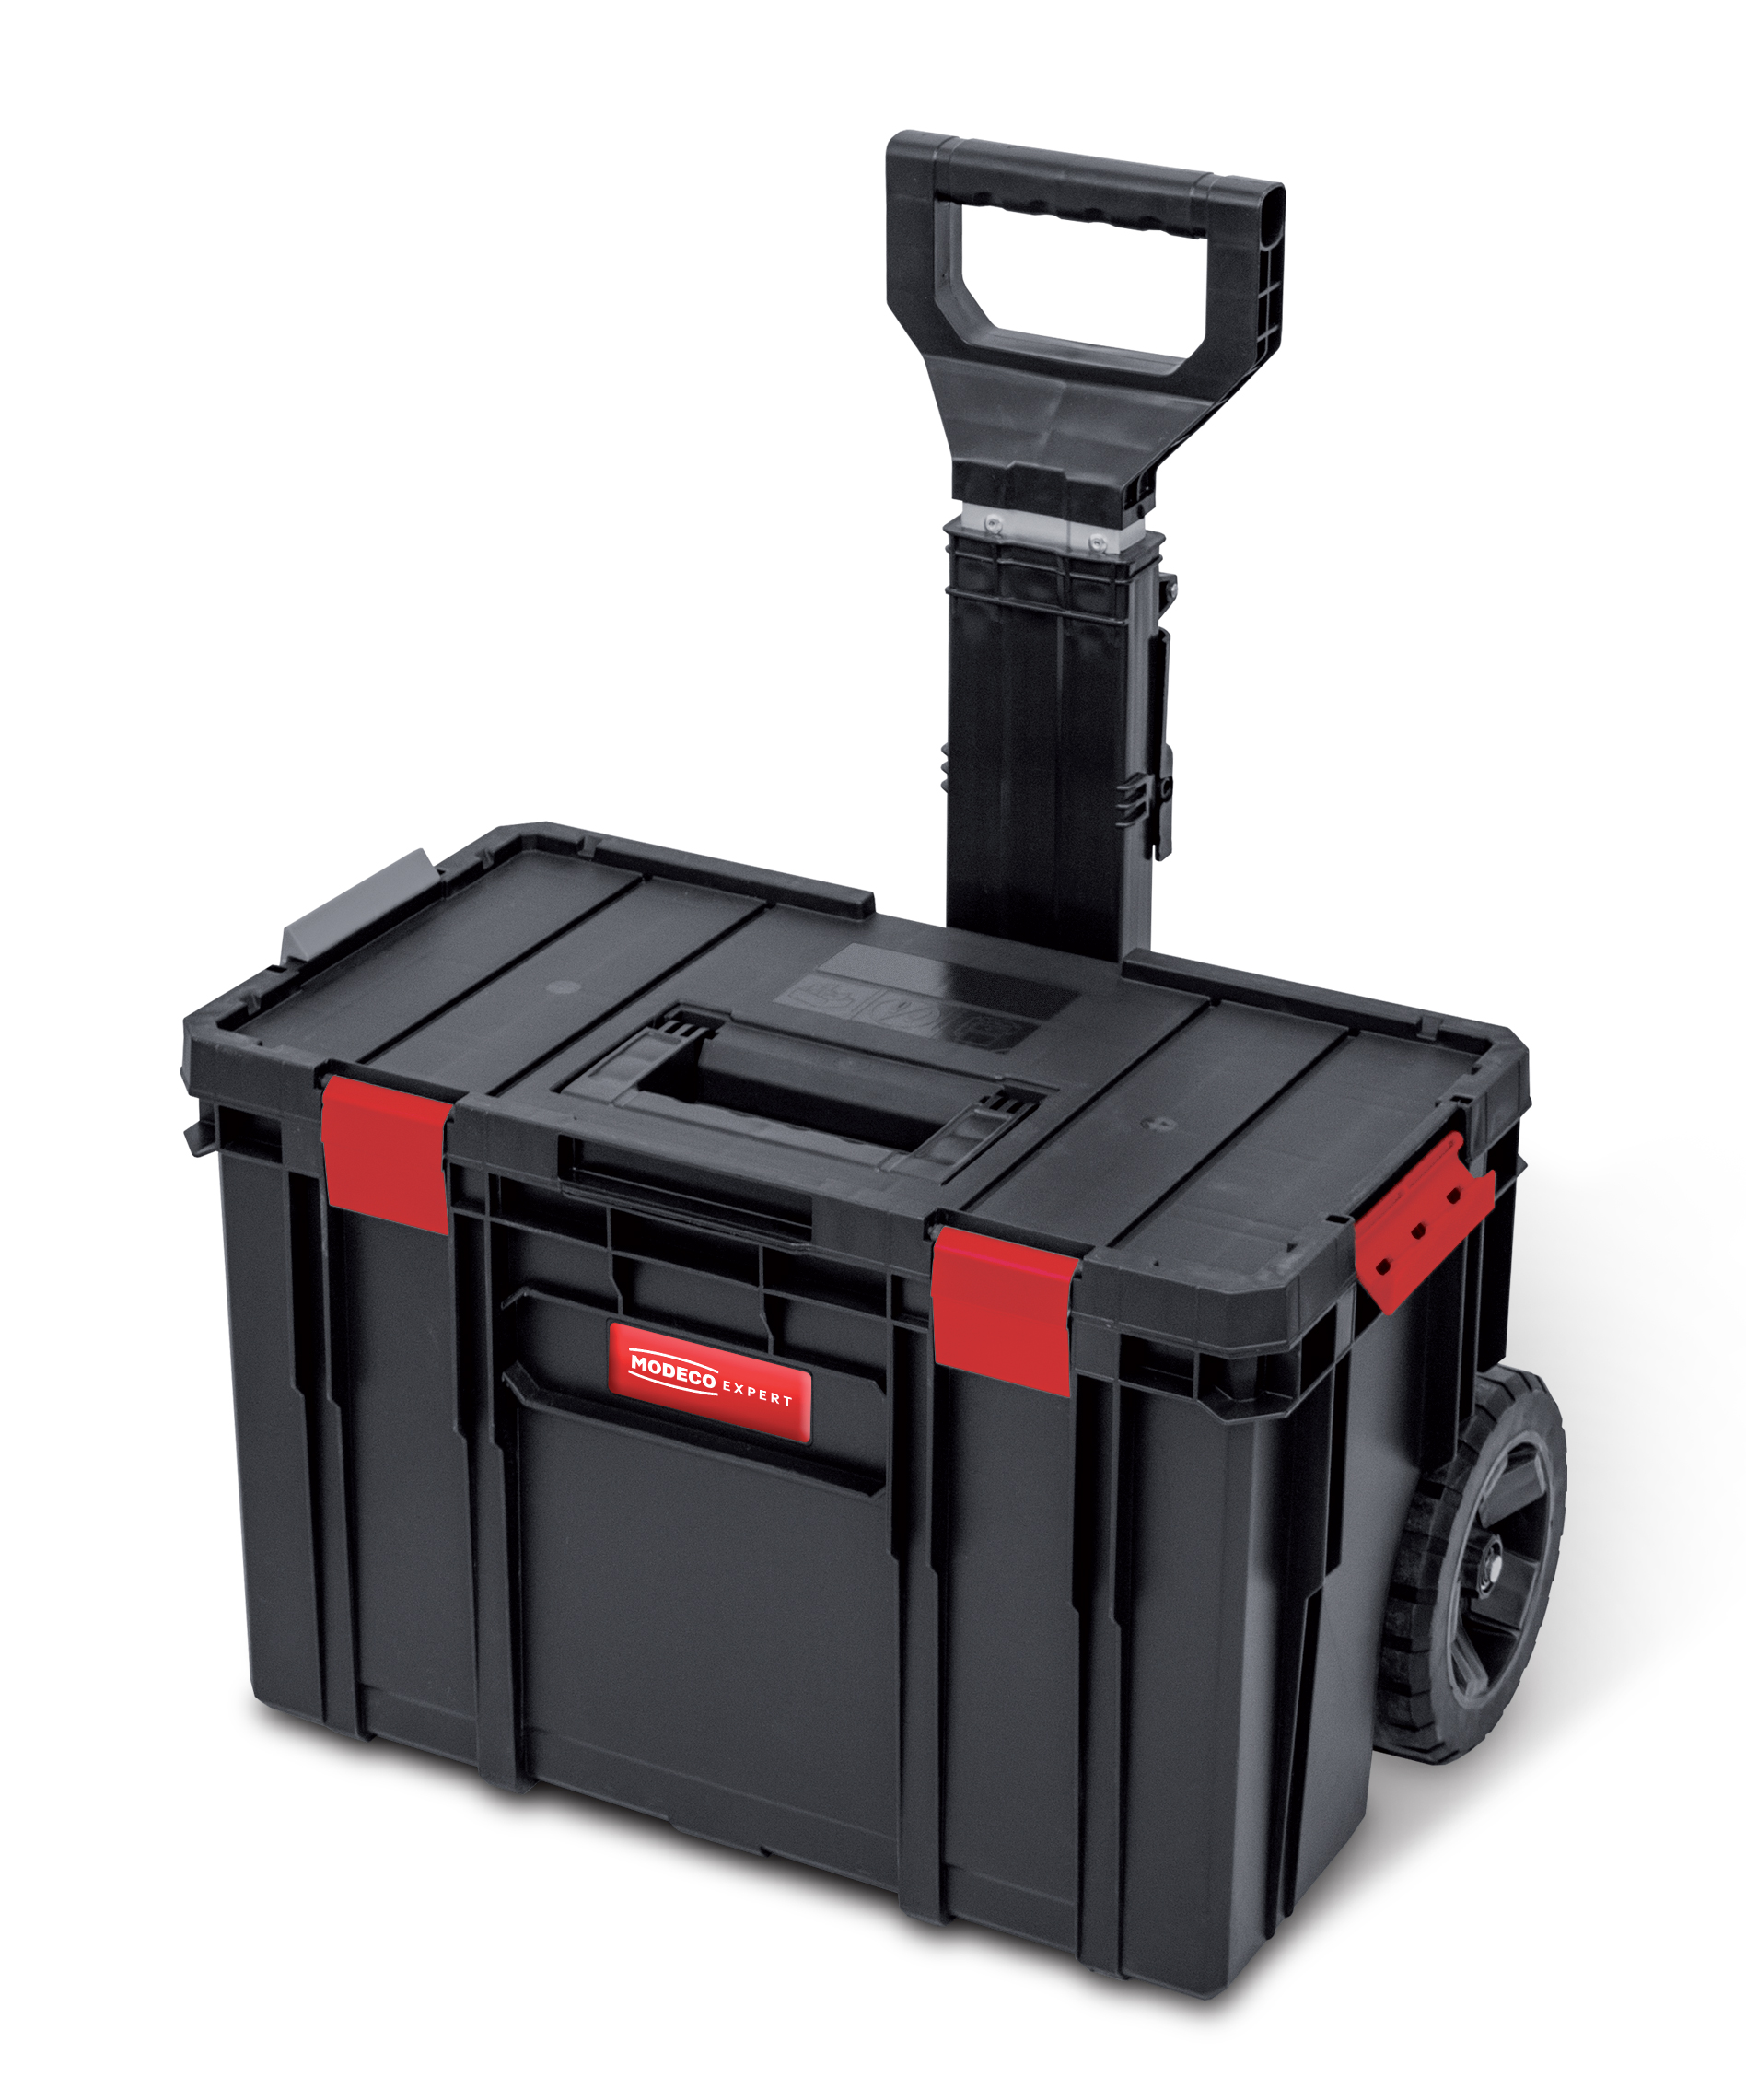 MN-03-172 Multi Storage System, box with 38 l wheels + compartments with organizer